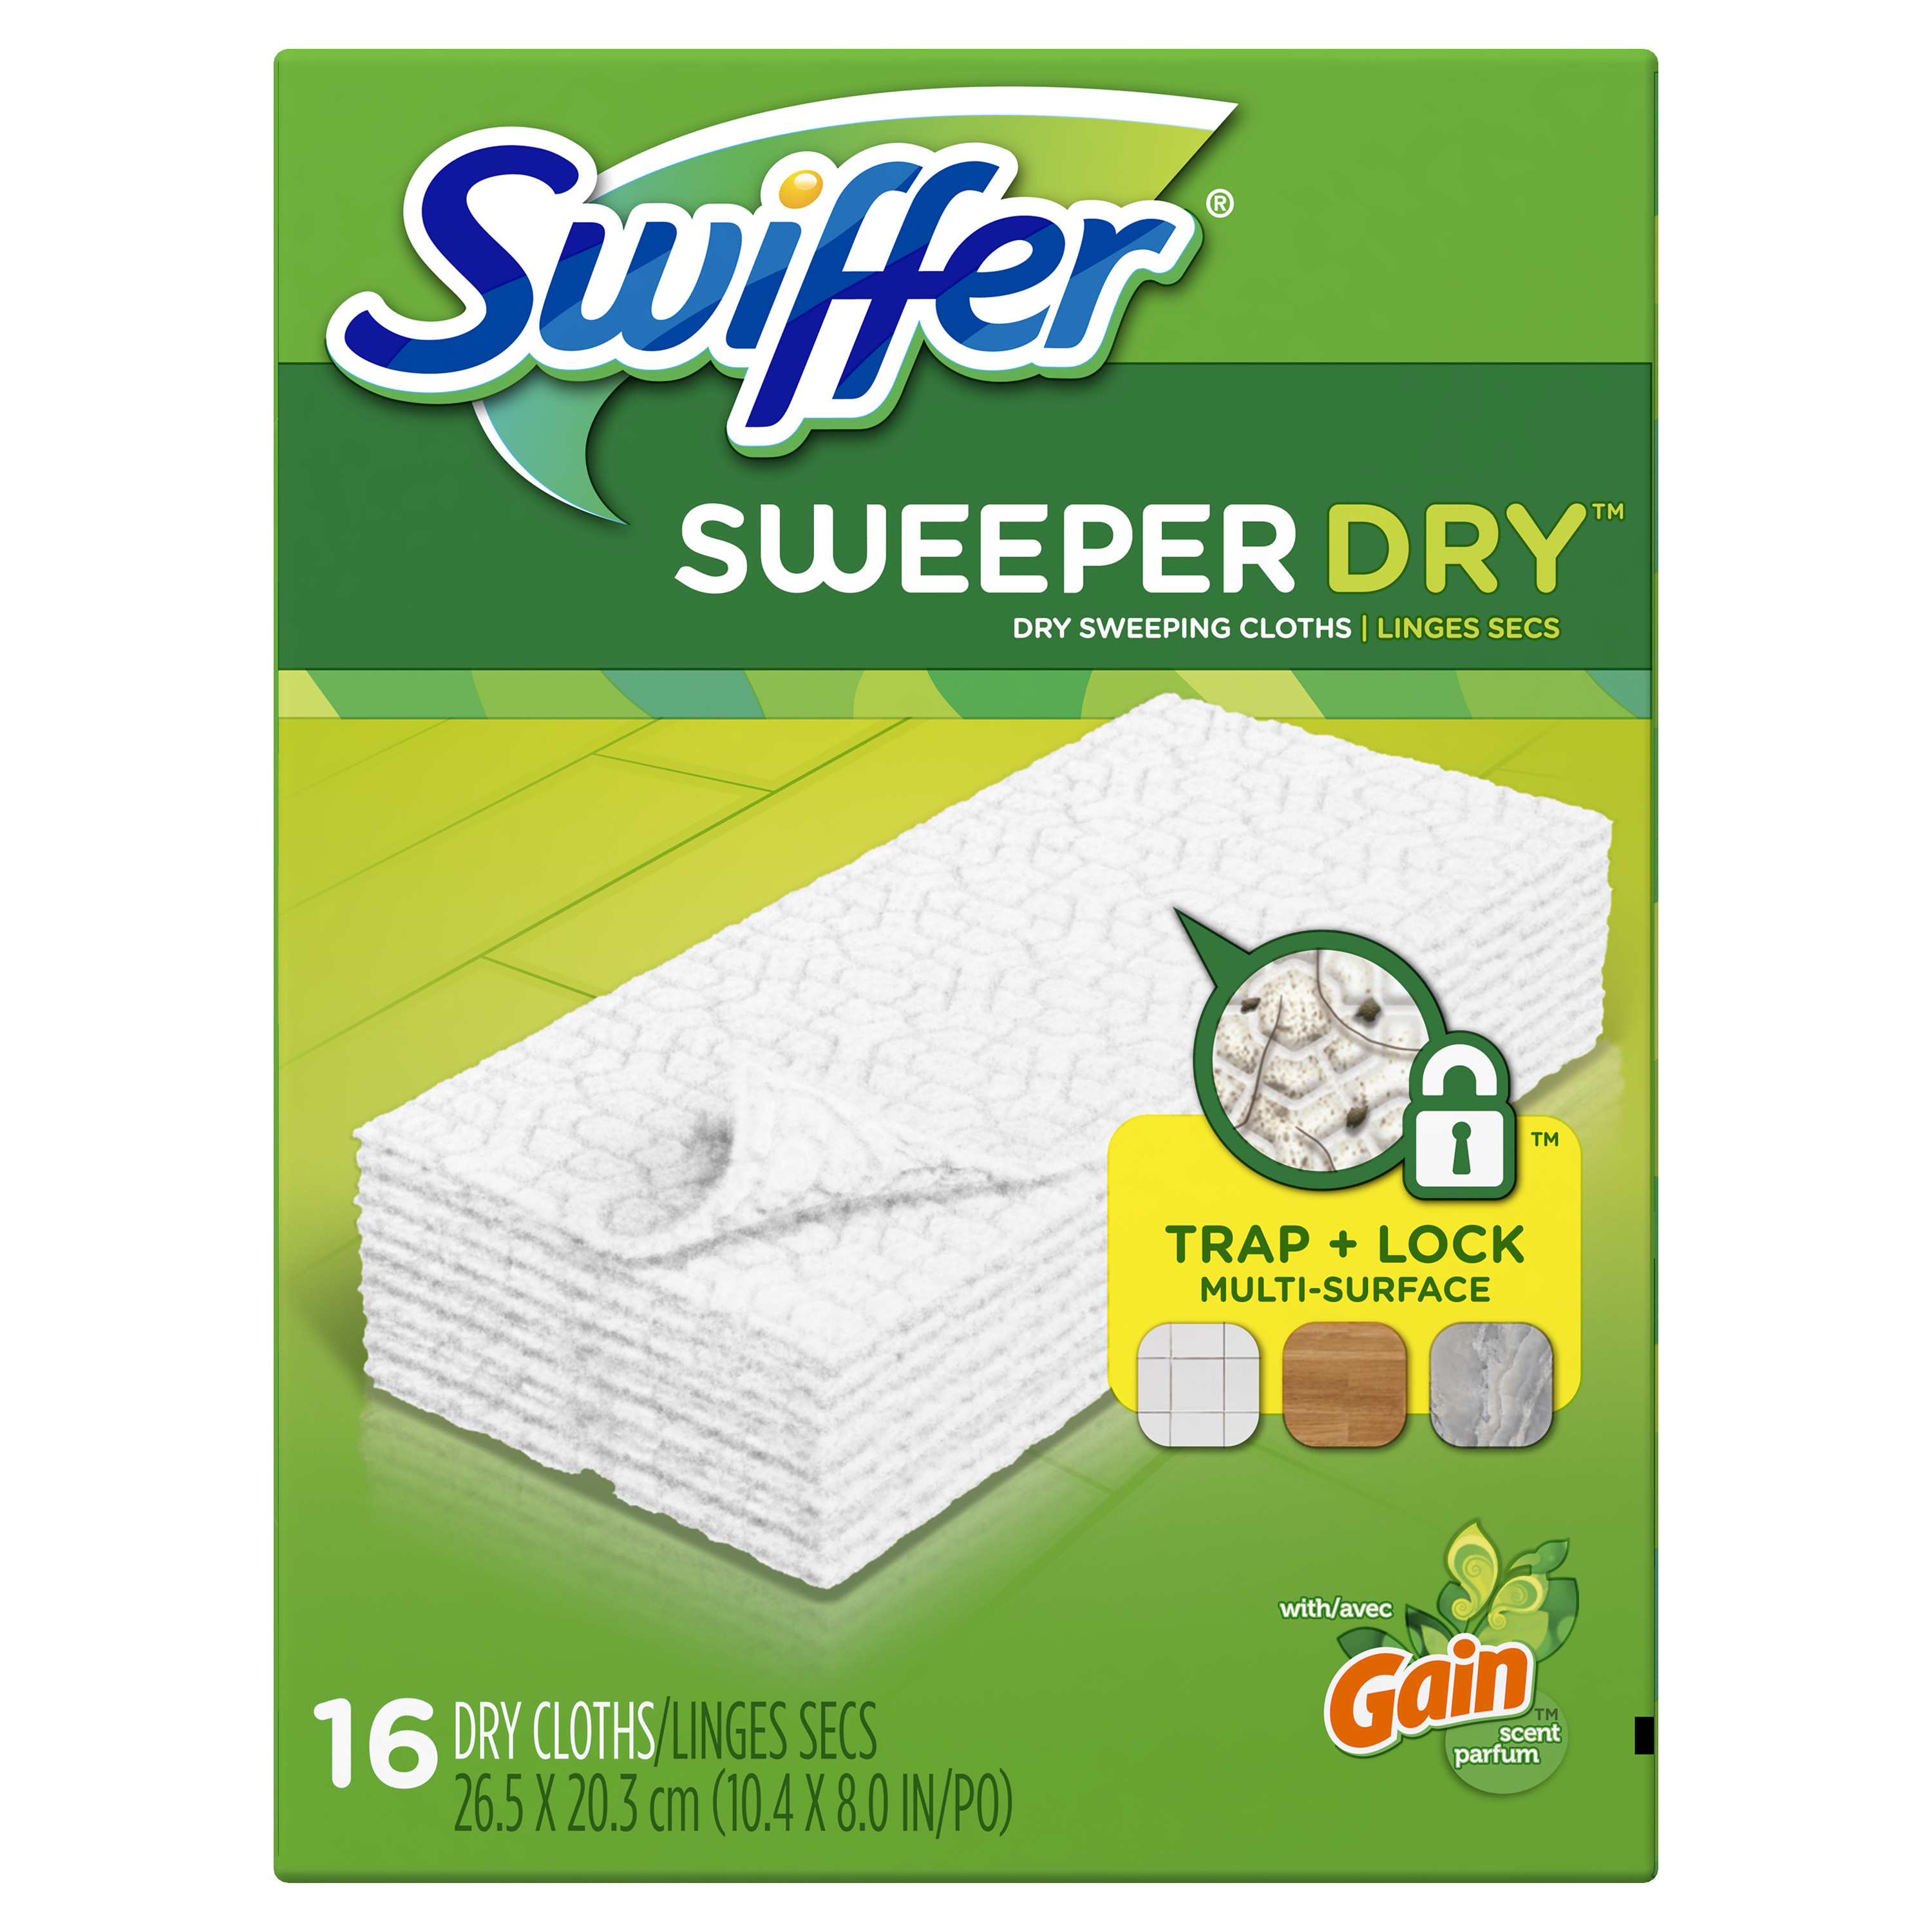 Swiffer Sweeper Dry Sweeping Pad Multi Surface Refills for Dusters Floor Mop, Gain Scent, 16 count - image 4 of 10